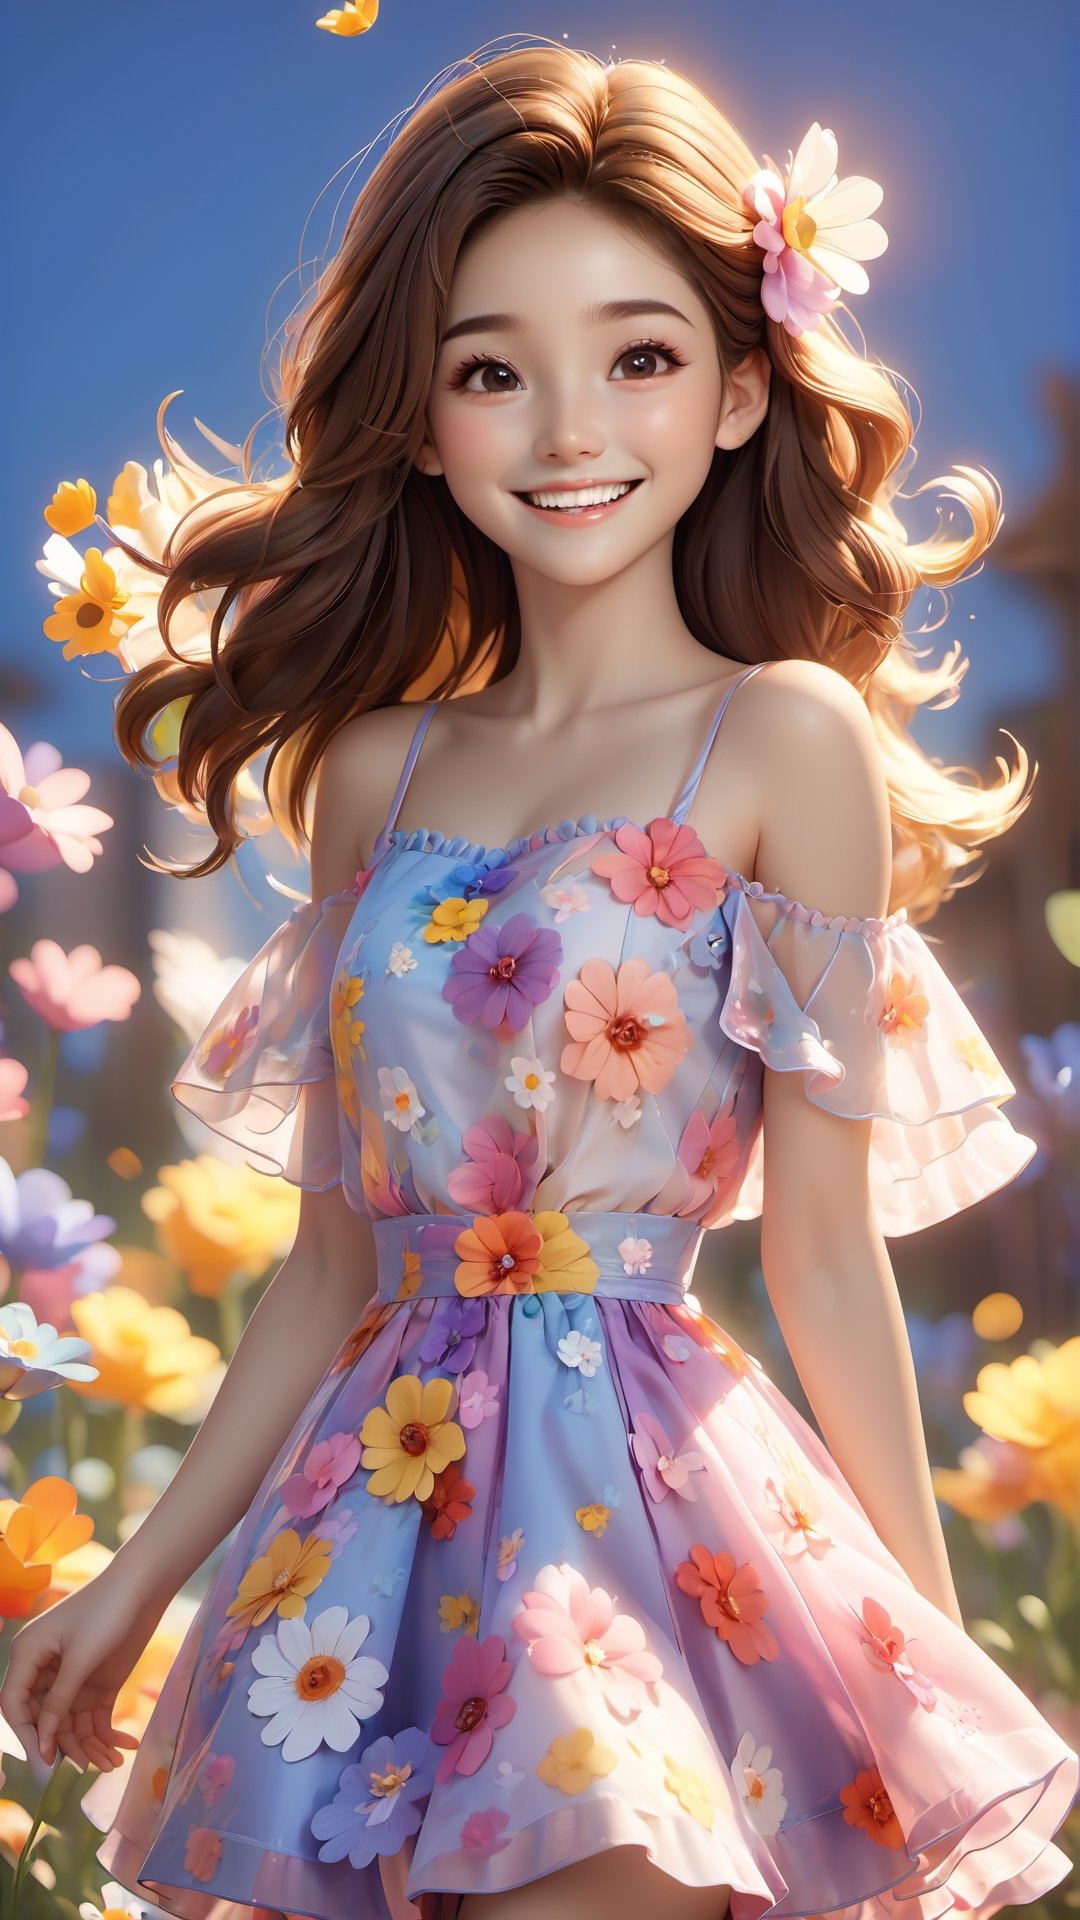 Super Cute Happy Girl 20 years old IP by pop mart, Singing in Flowers, SunLight Lighting, Full Body photography, ruffled dress,smile, happy, Art,Clay Materials, Pixar Trends, Garden Lighting, Super Detail, Stylish colors, stylish dressing, OC,Blender, best Quality